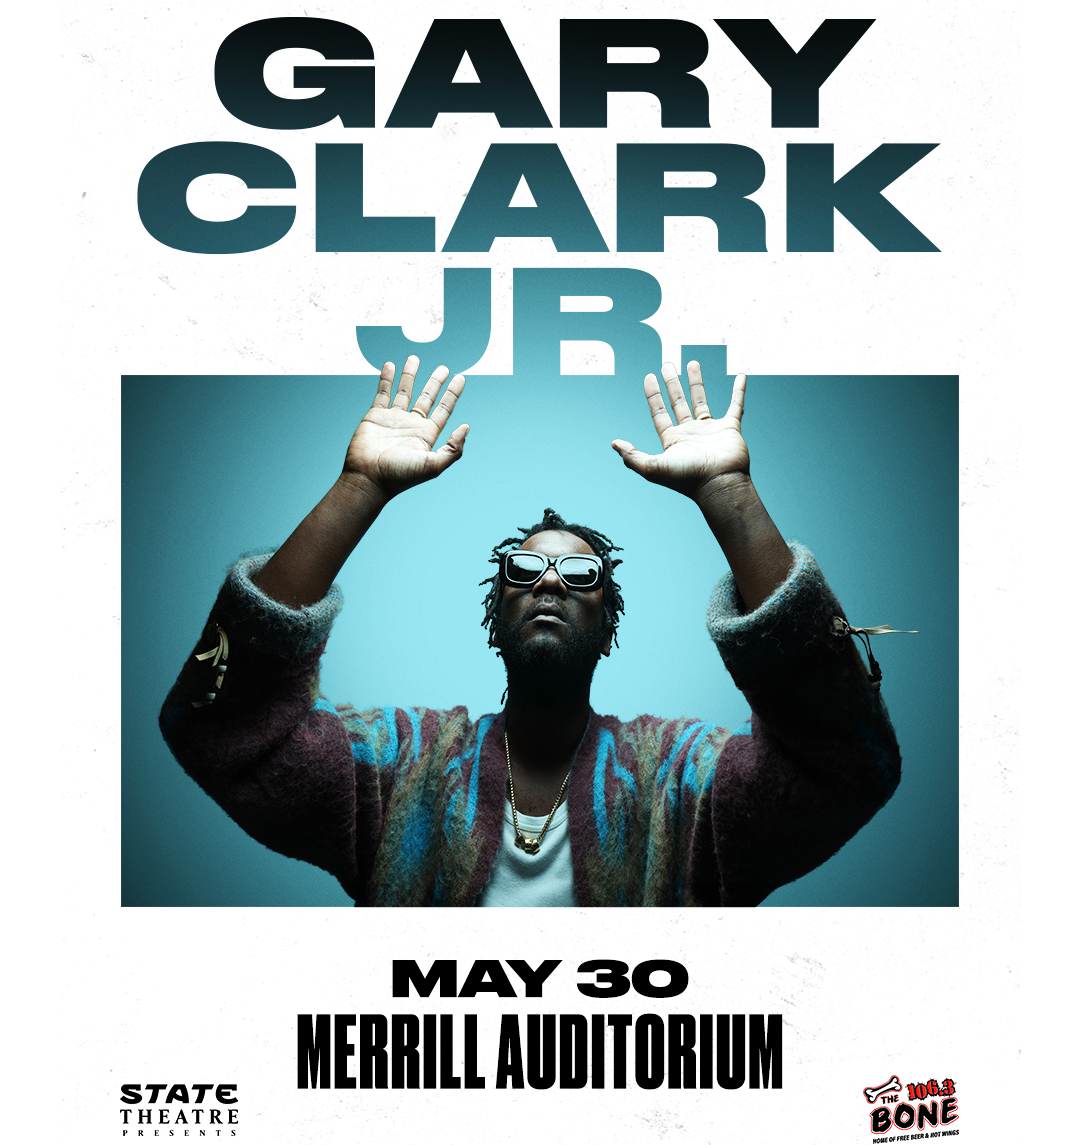 Enter to win tickets to Gary Clark Jr.